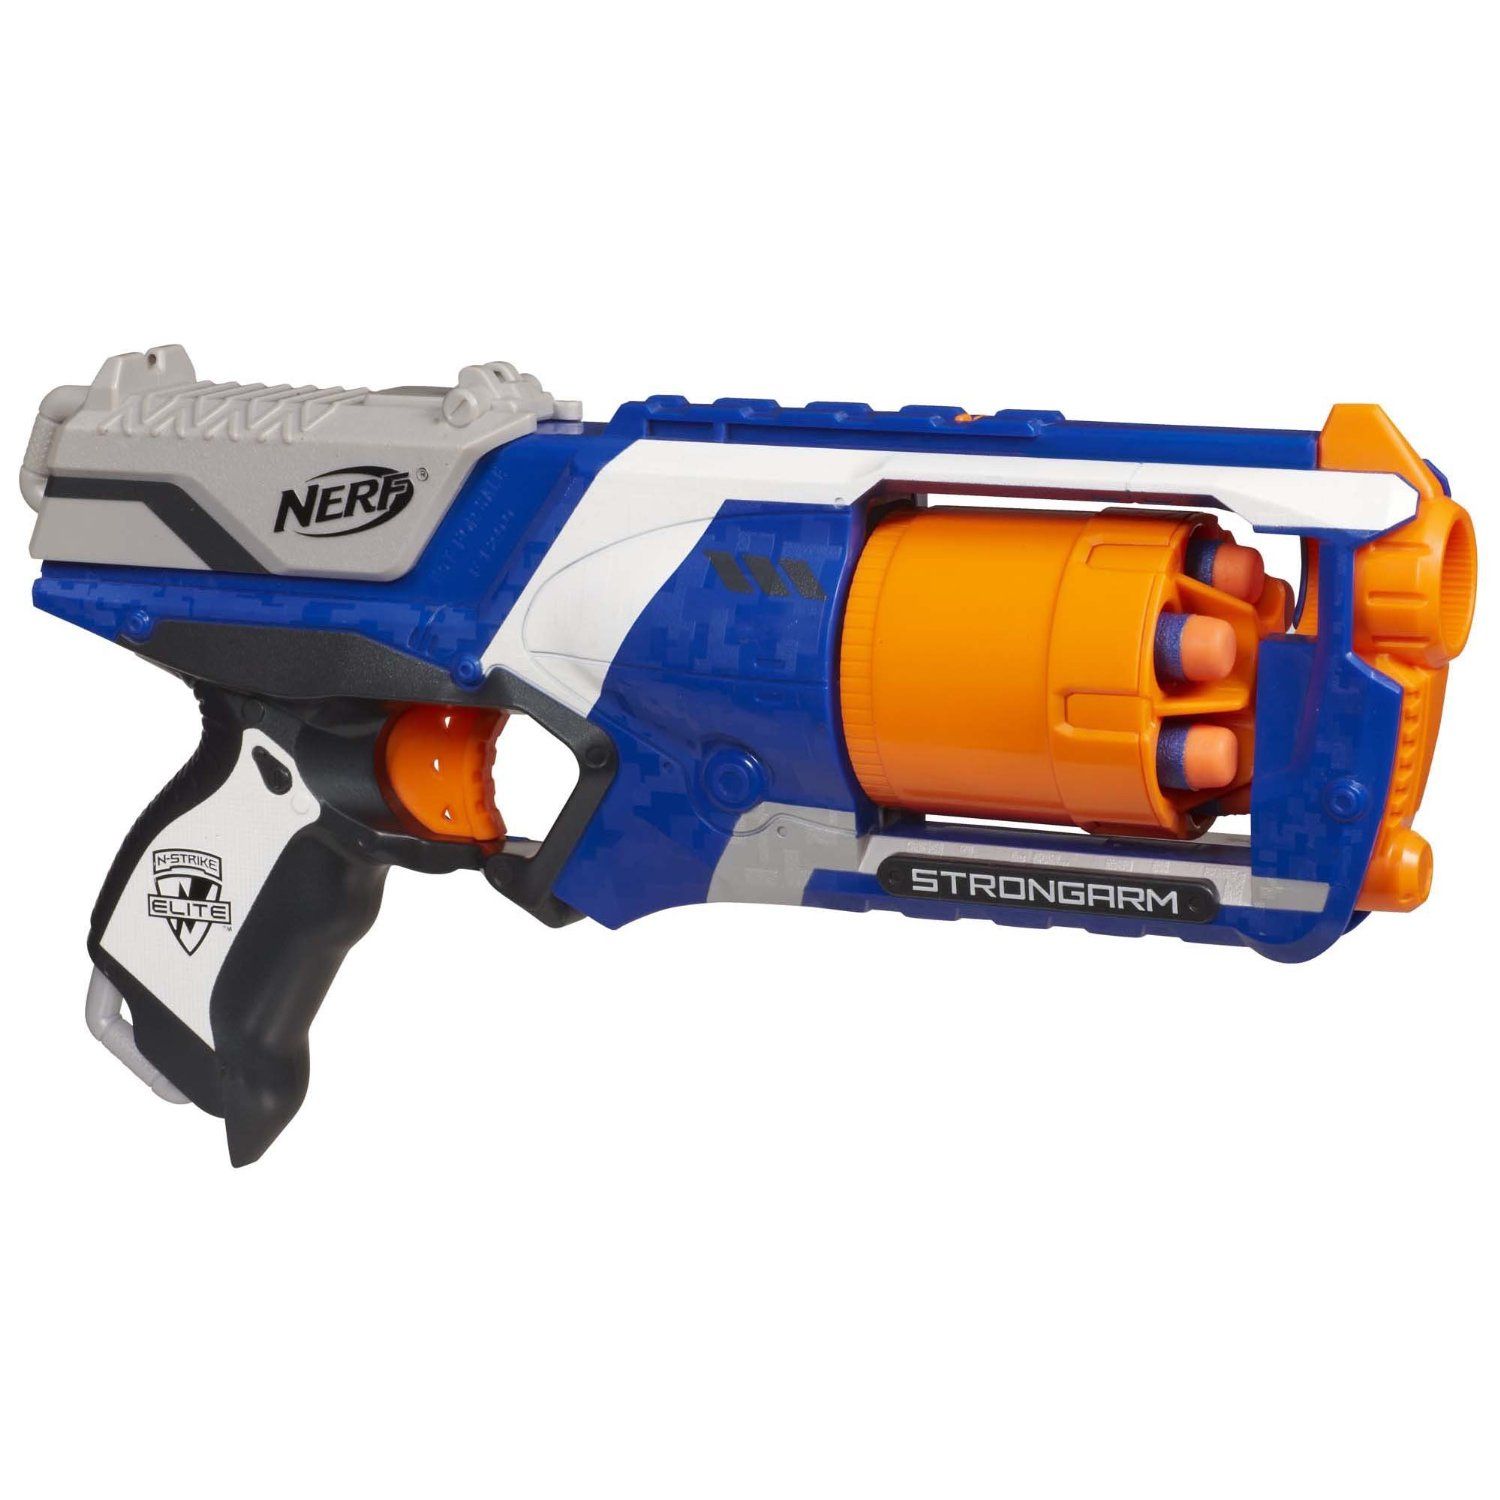 20 of the best Nerf games to make and play